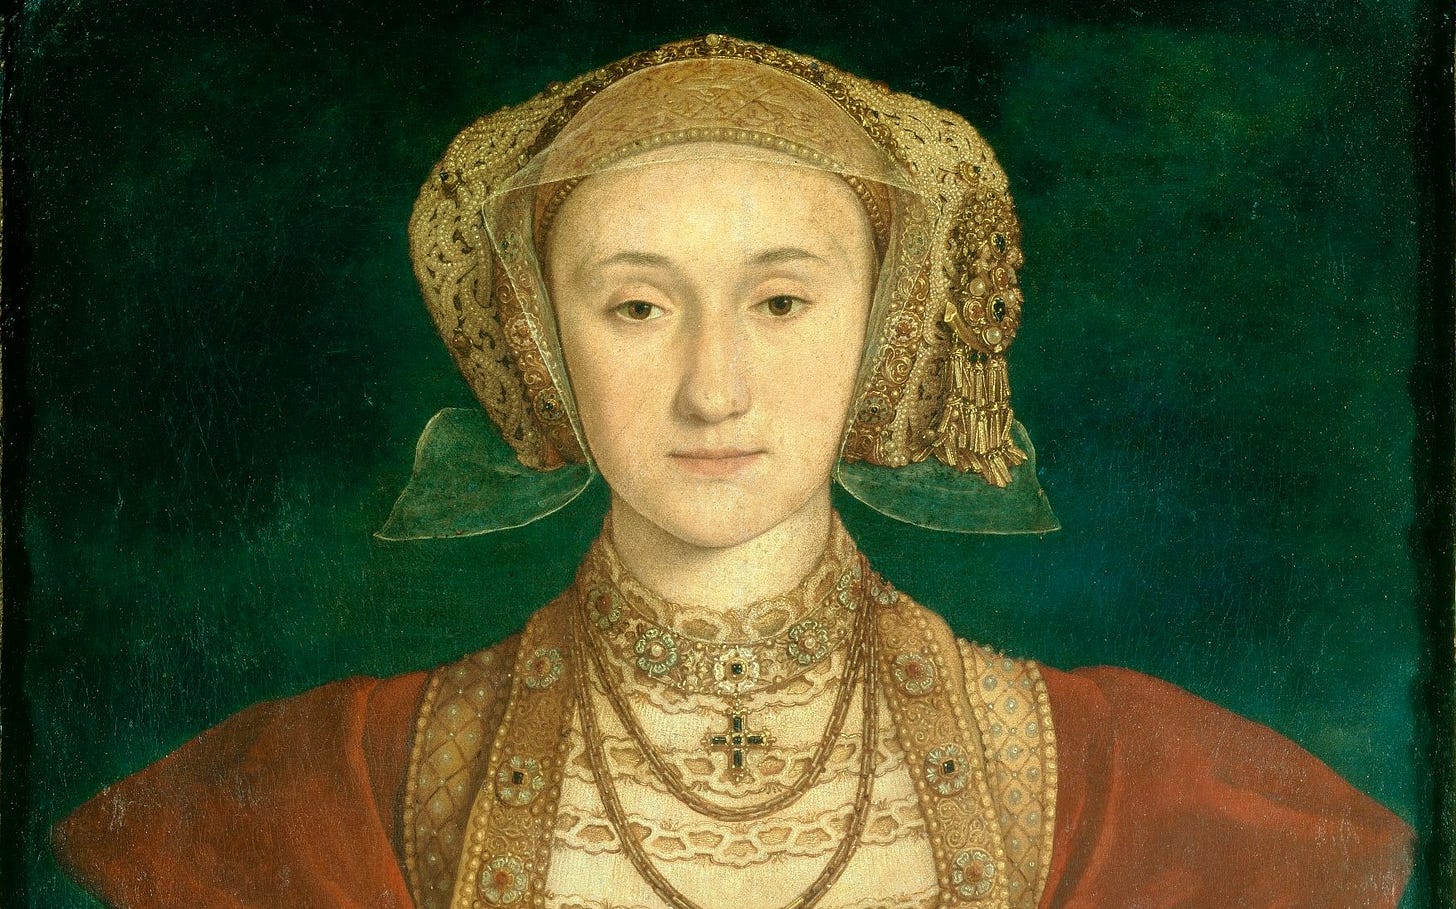 Henry VIII 'may have divorced Anne of Cleves because she already had a baby  with someone else'